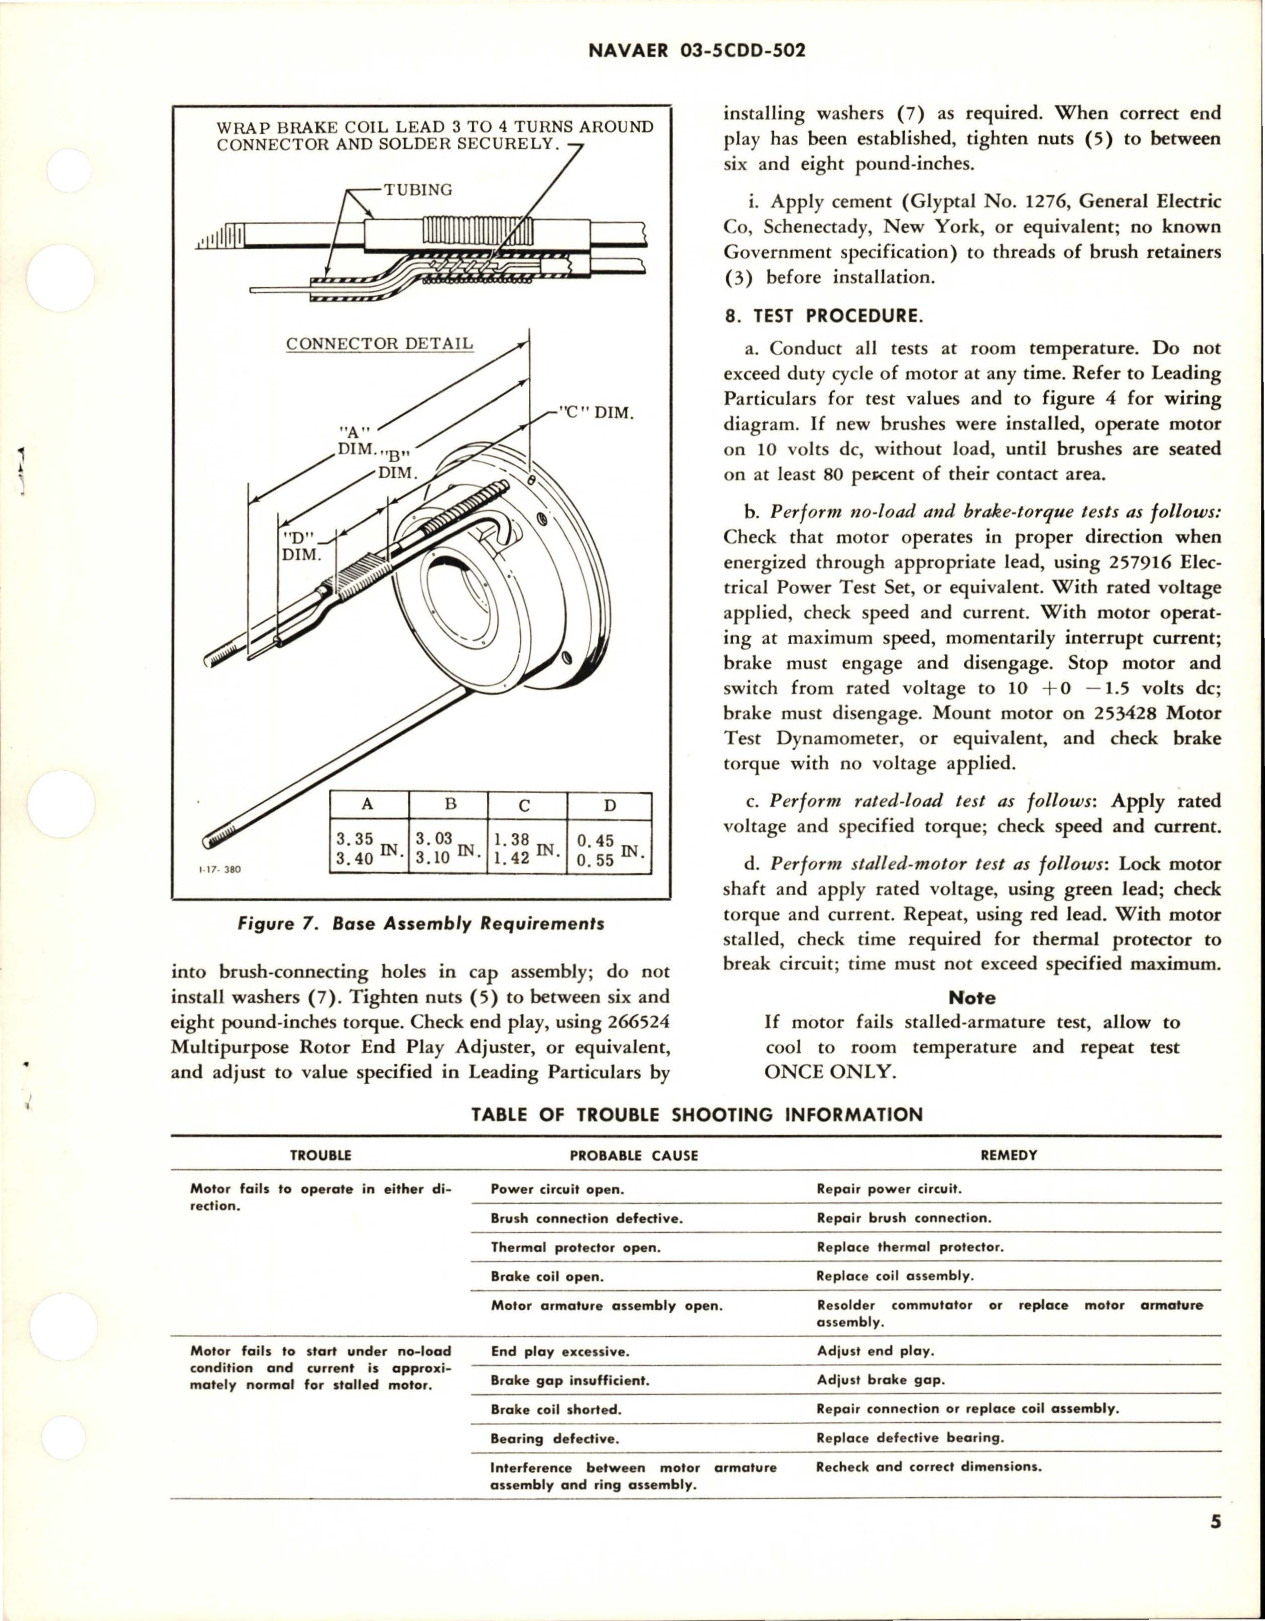 Sample page 5 from AirCorps Library document: Overhaul Instructions with Parts Breakdown for Direct Current Motor - 0.07 HP - Part 32355-6